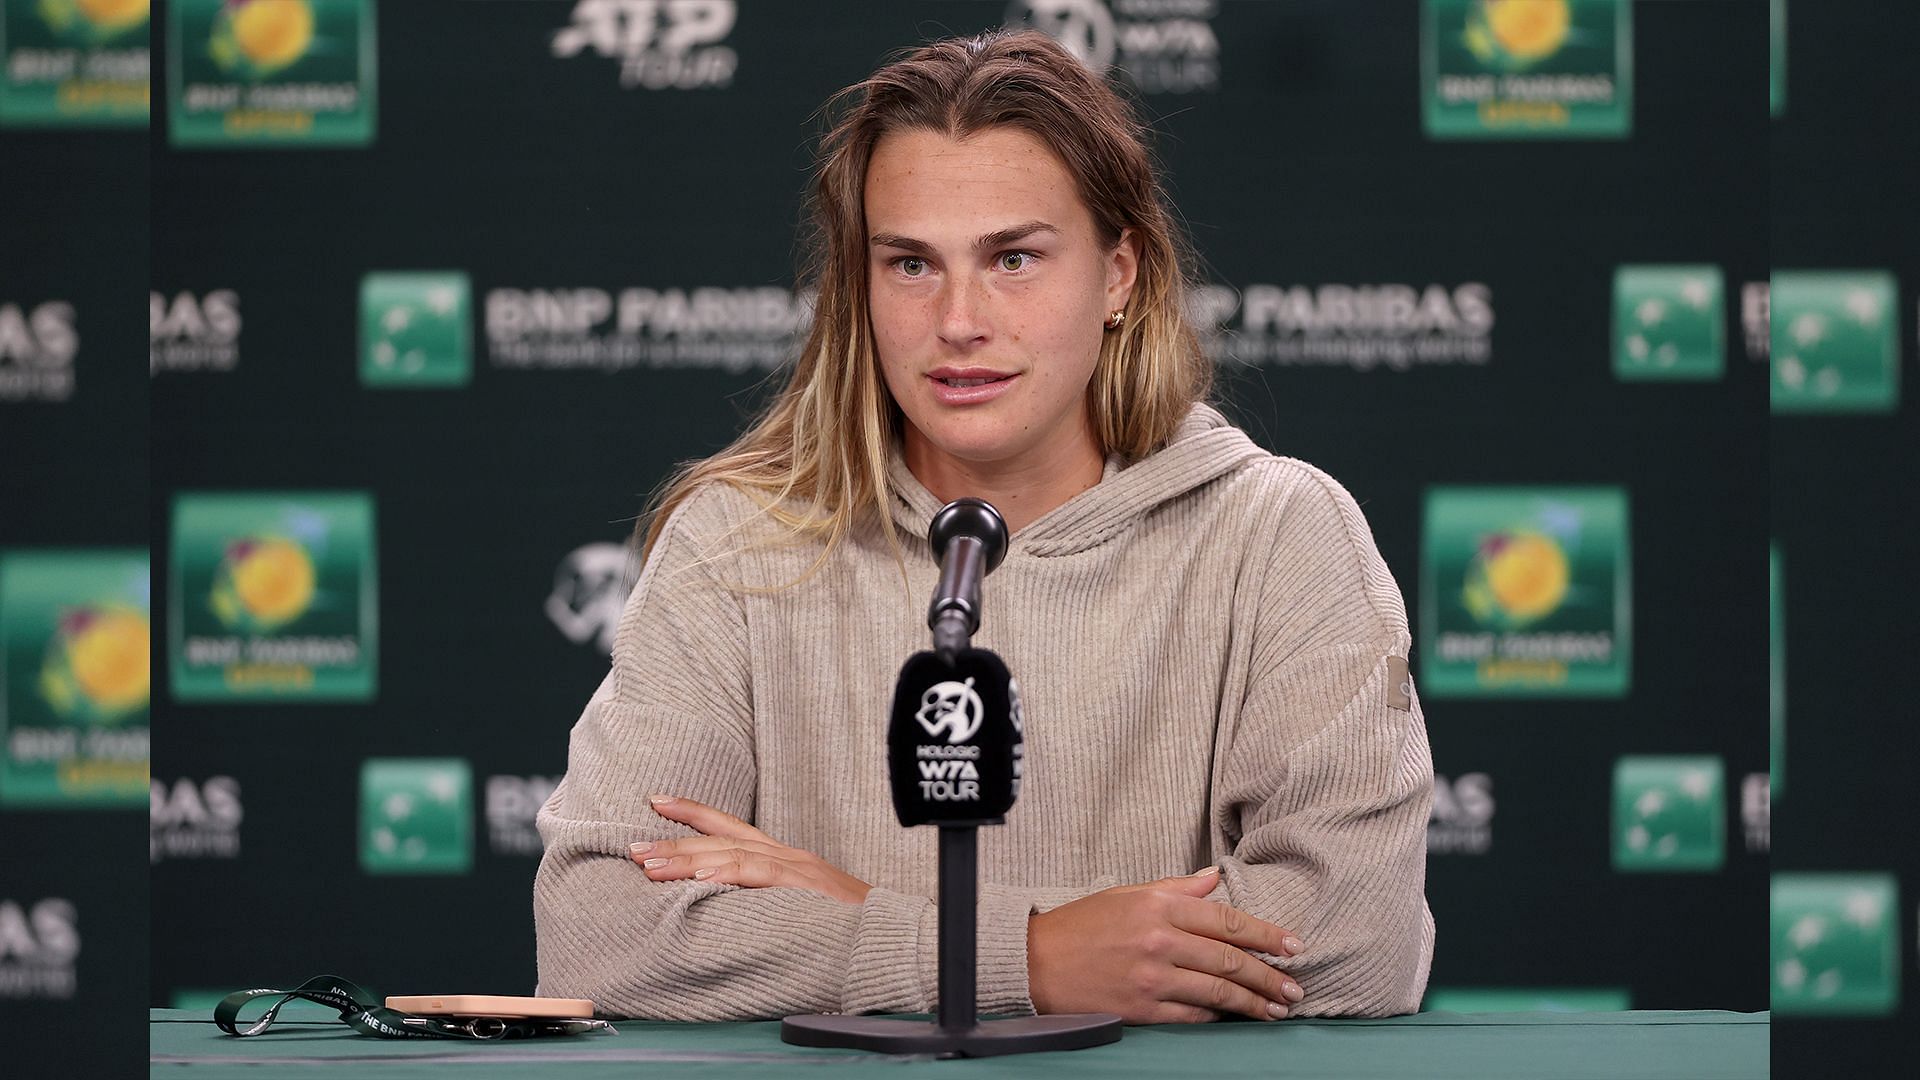 Aryna Sabalenka touched on the Russia-Ukraine war in her recent press conference